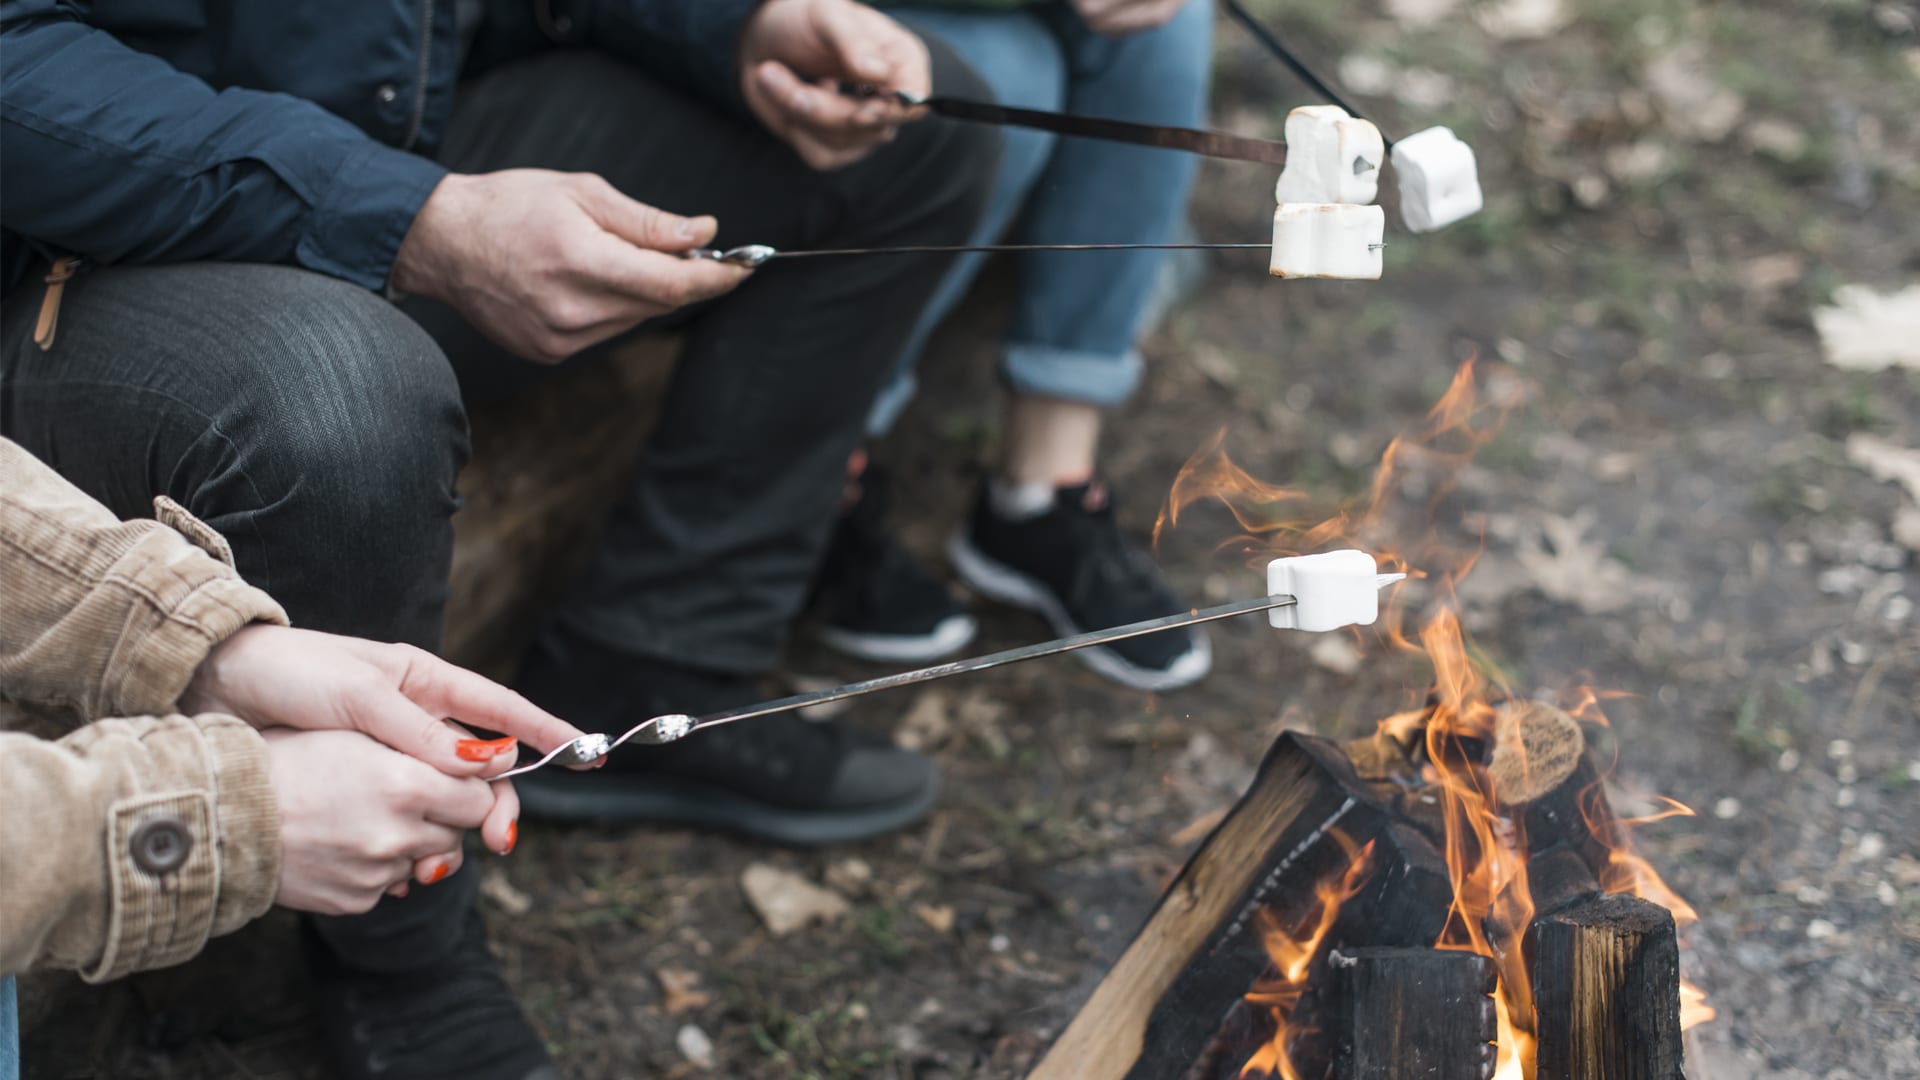 toasting marshmallows over the fire